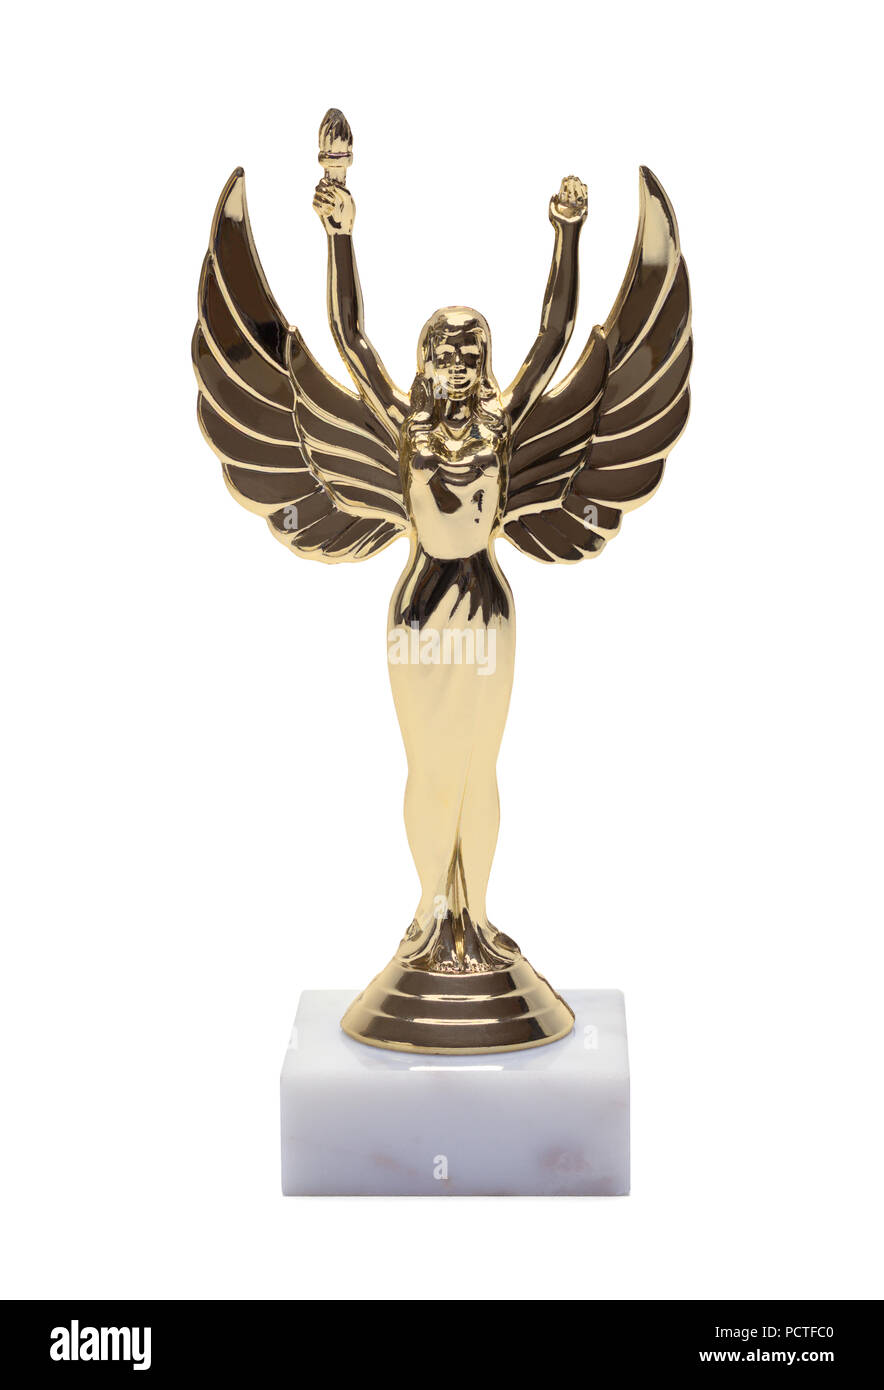 Gold Winged Girl Trophy Isolated on a White Background. Stock Photo